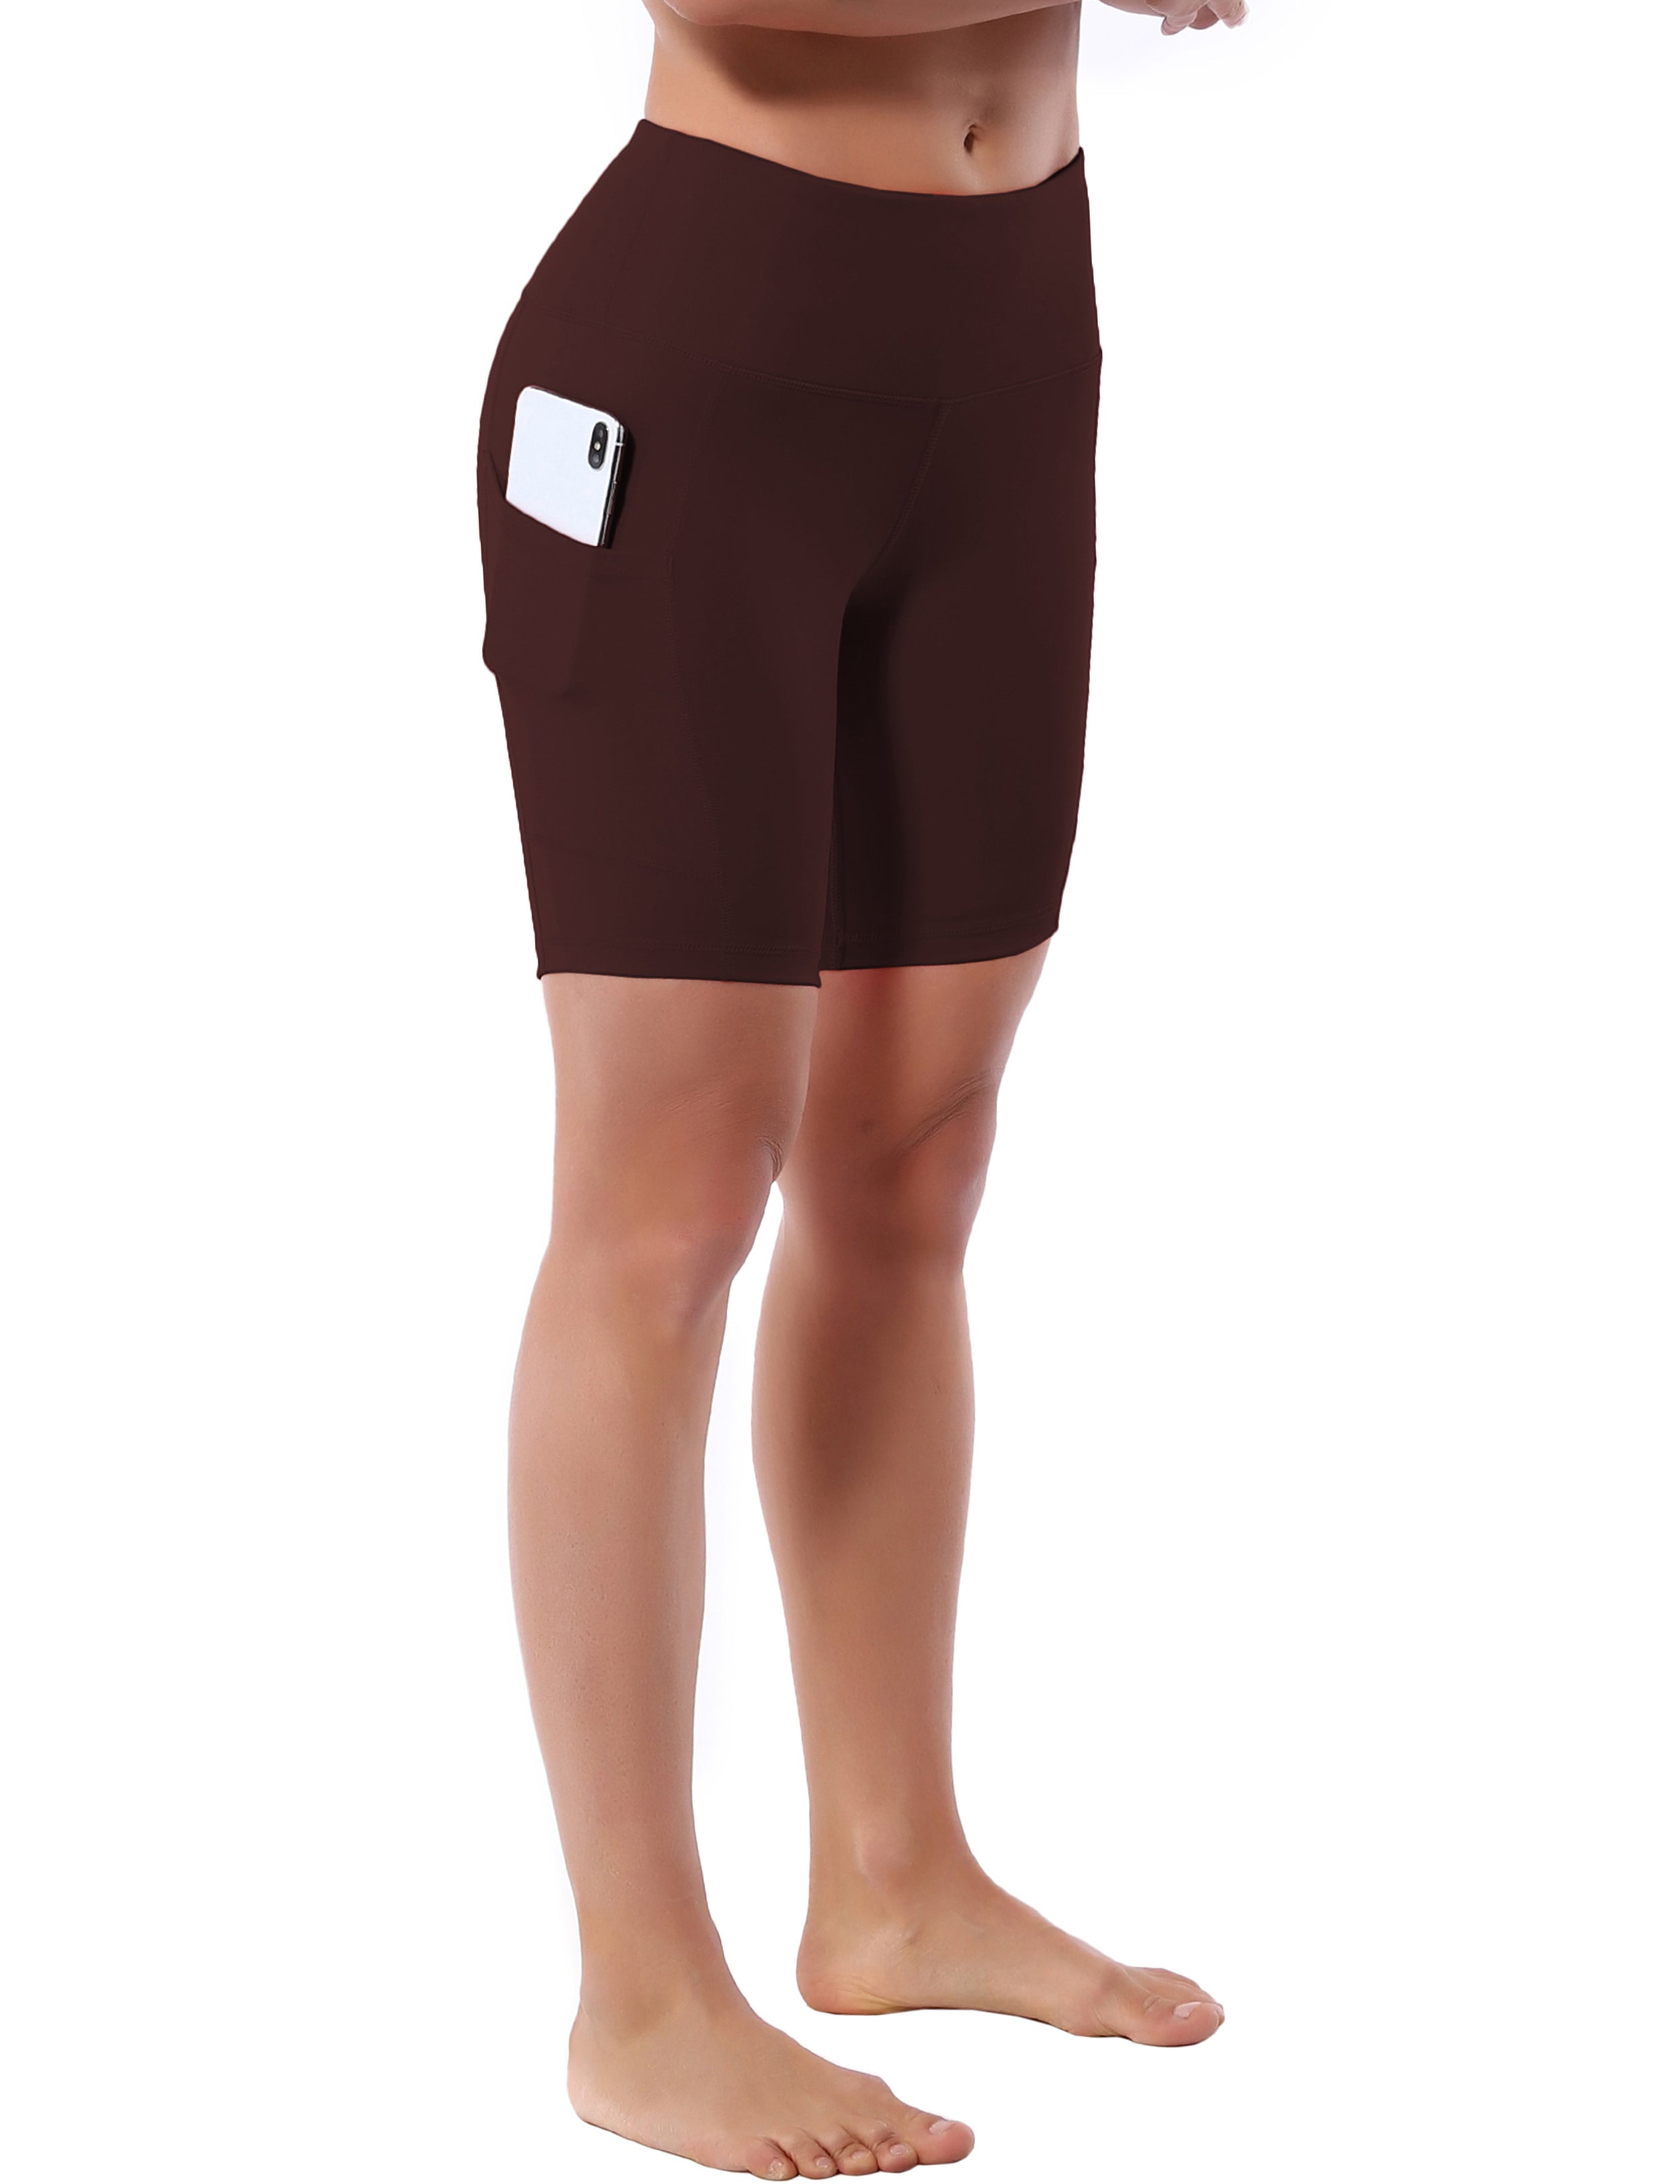 8" Side Pockets yogastudio Shorts mahoganymaroon Sleek, soft, smooth and totally comfortable: our newest style is here. Softest-ever fabric High elasticity High density 4-way stretch Fabric doesn't attract lint easily No see-through Moisture-wicking Machine wash 75% Nylon, 25% Spandex